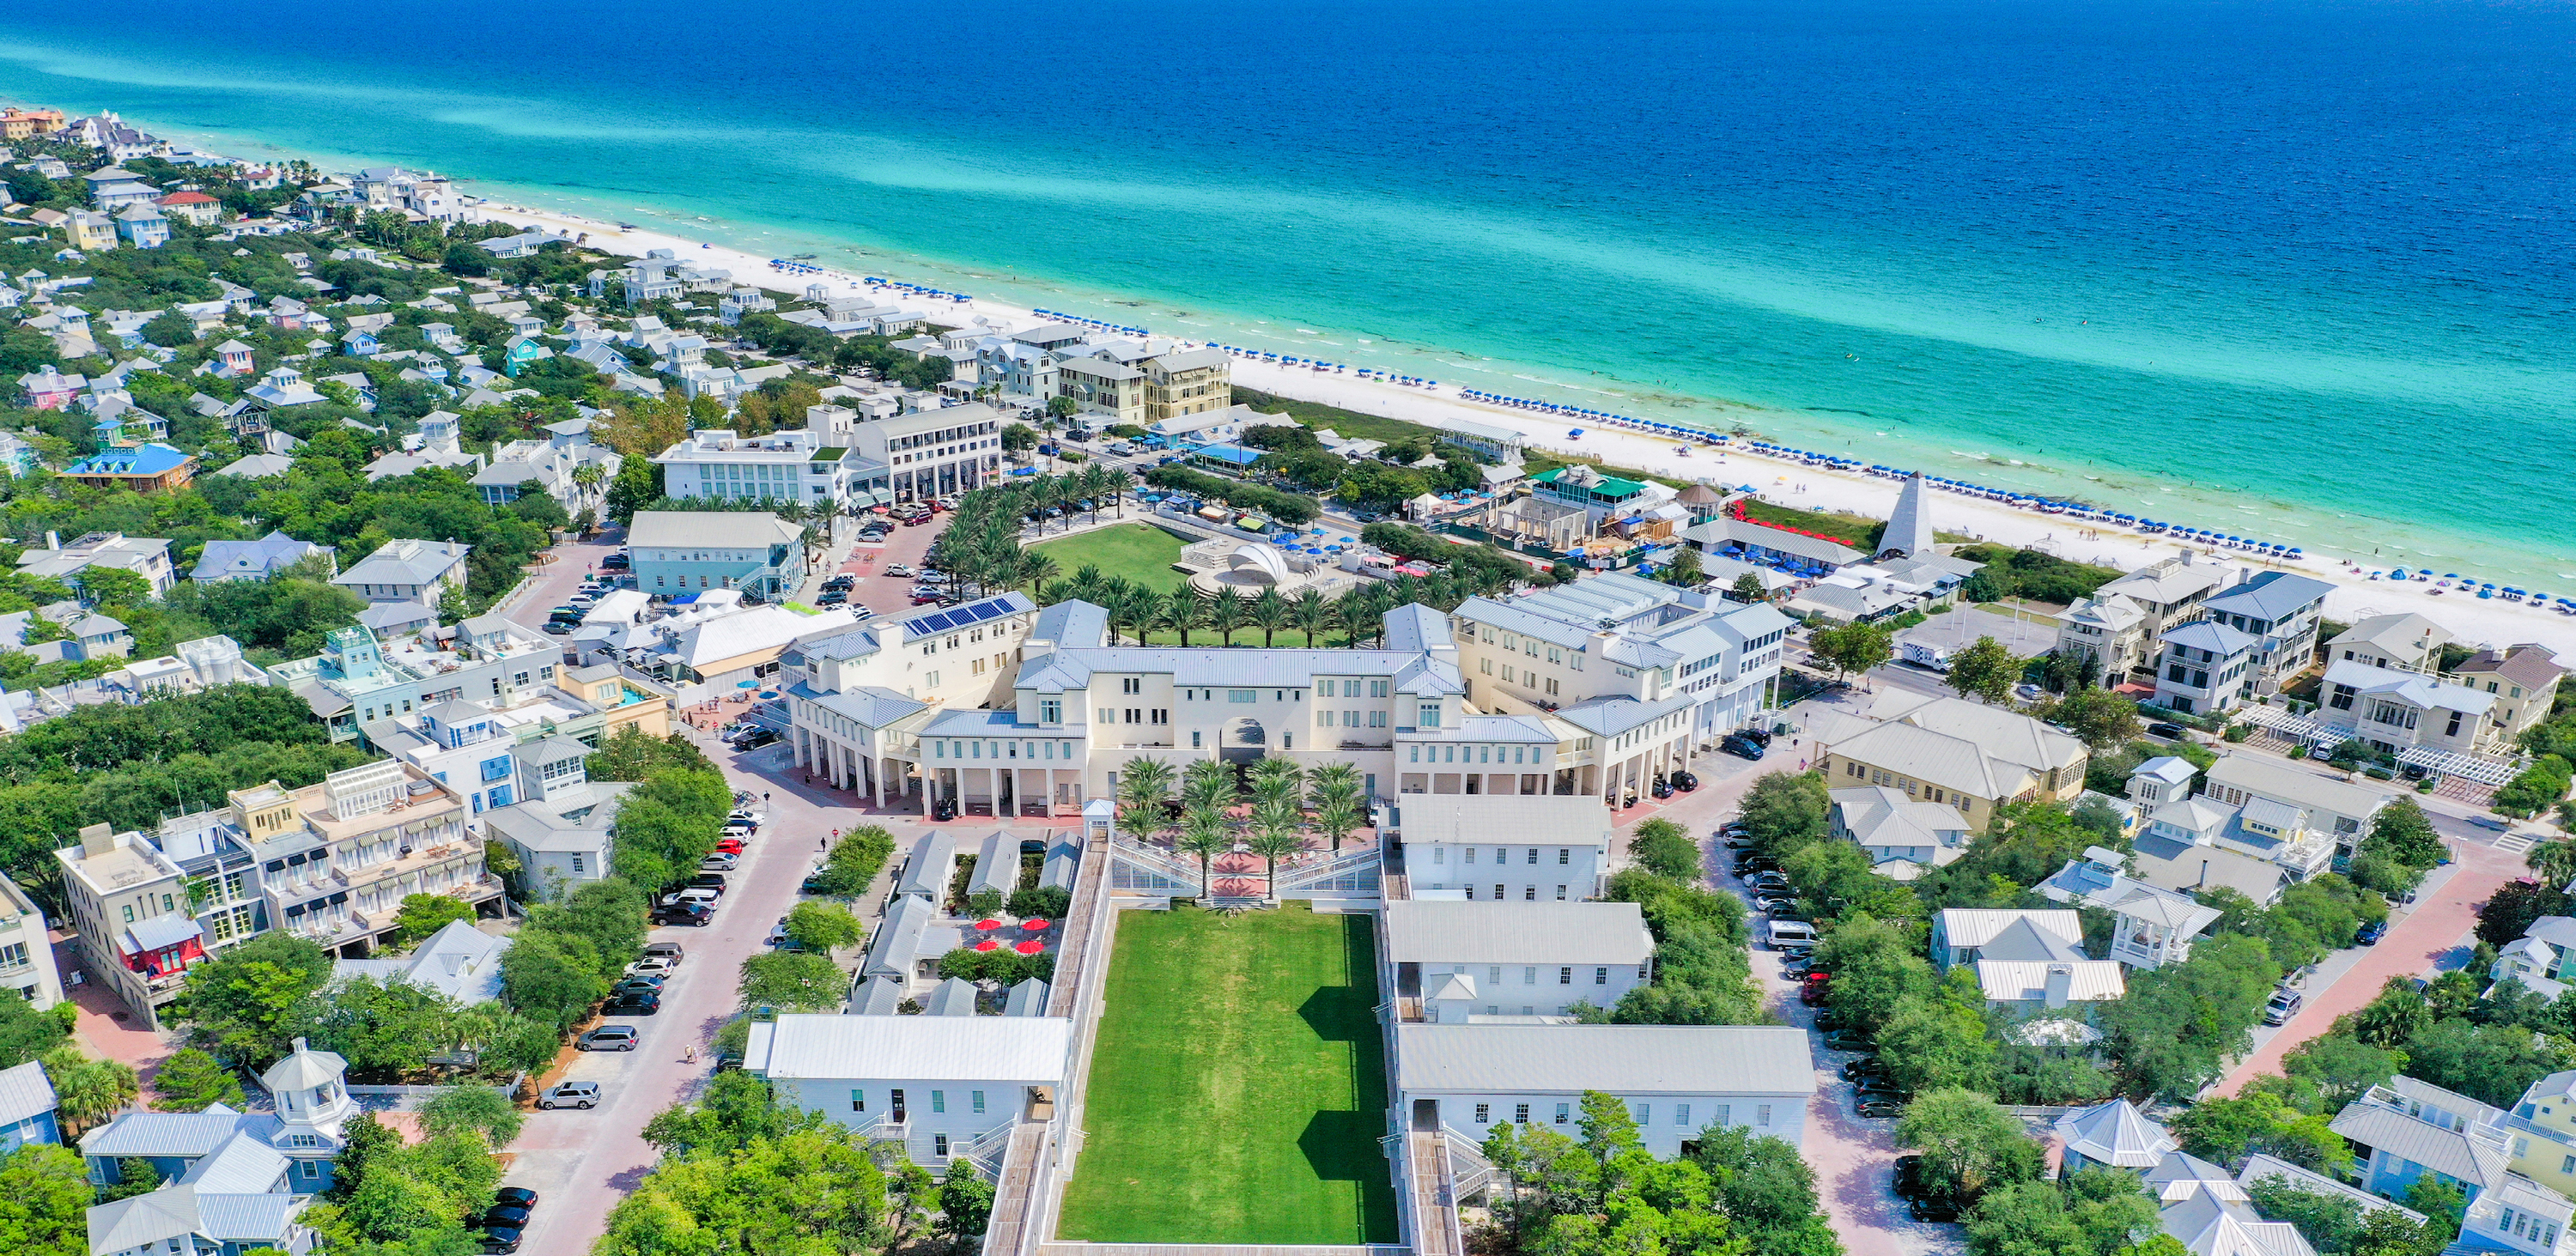 An aerial view of the Seaside community including the town center and brilliant blue gulf waters in the background